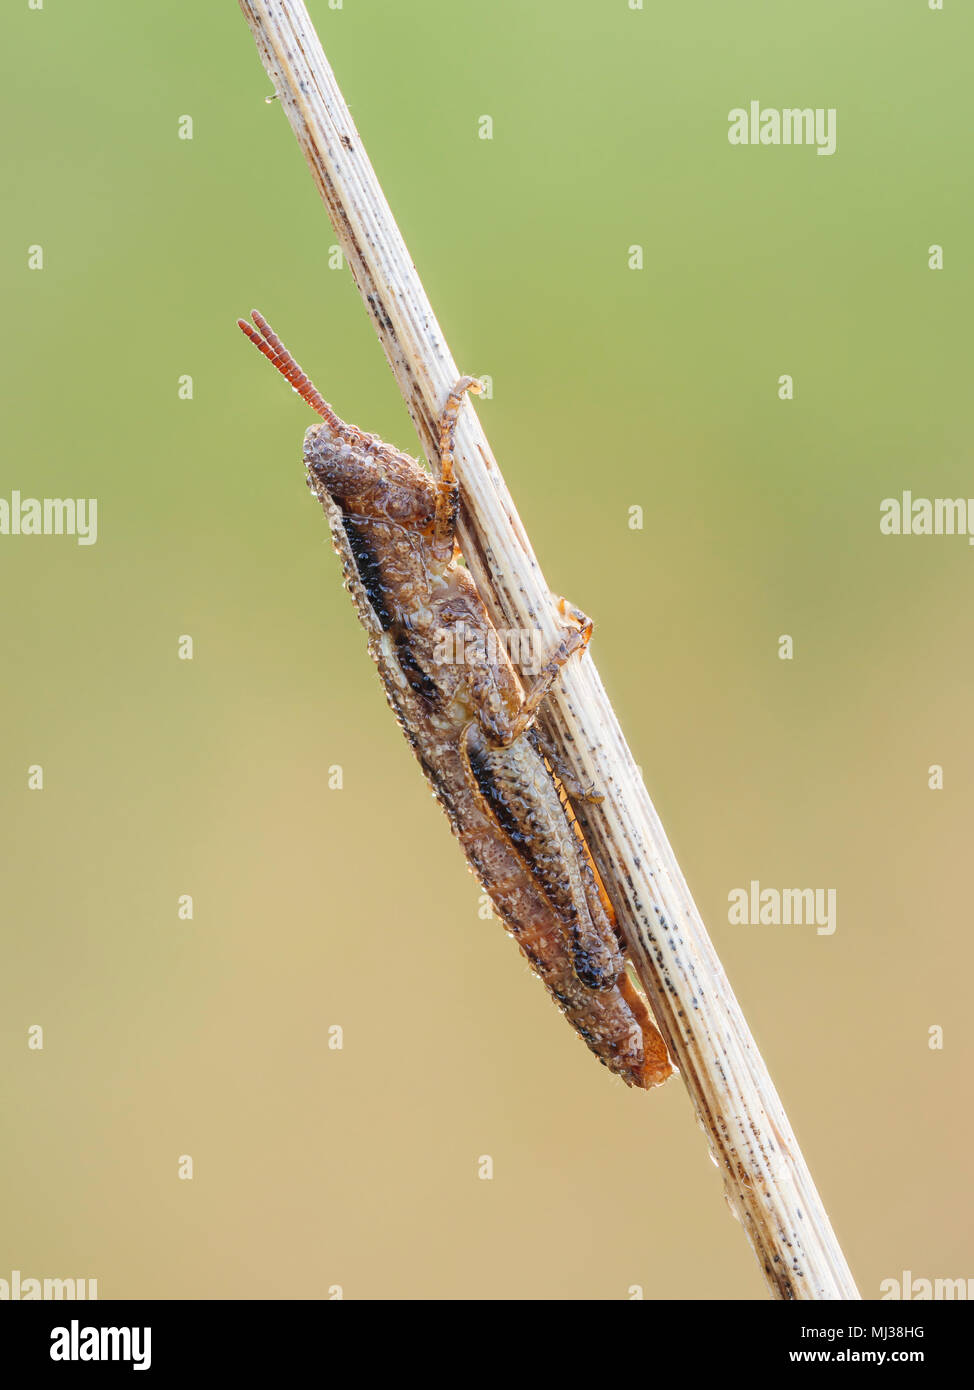 A dew covered Short-horned Grasshopper (Aptenopedes) nymph warms up on vegetation in the early morning. Stock Photo